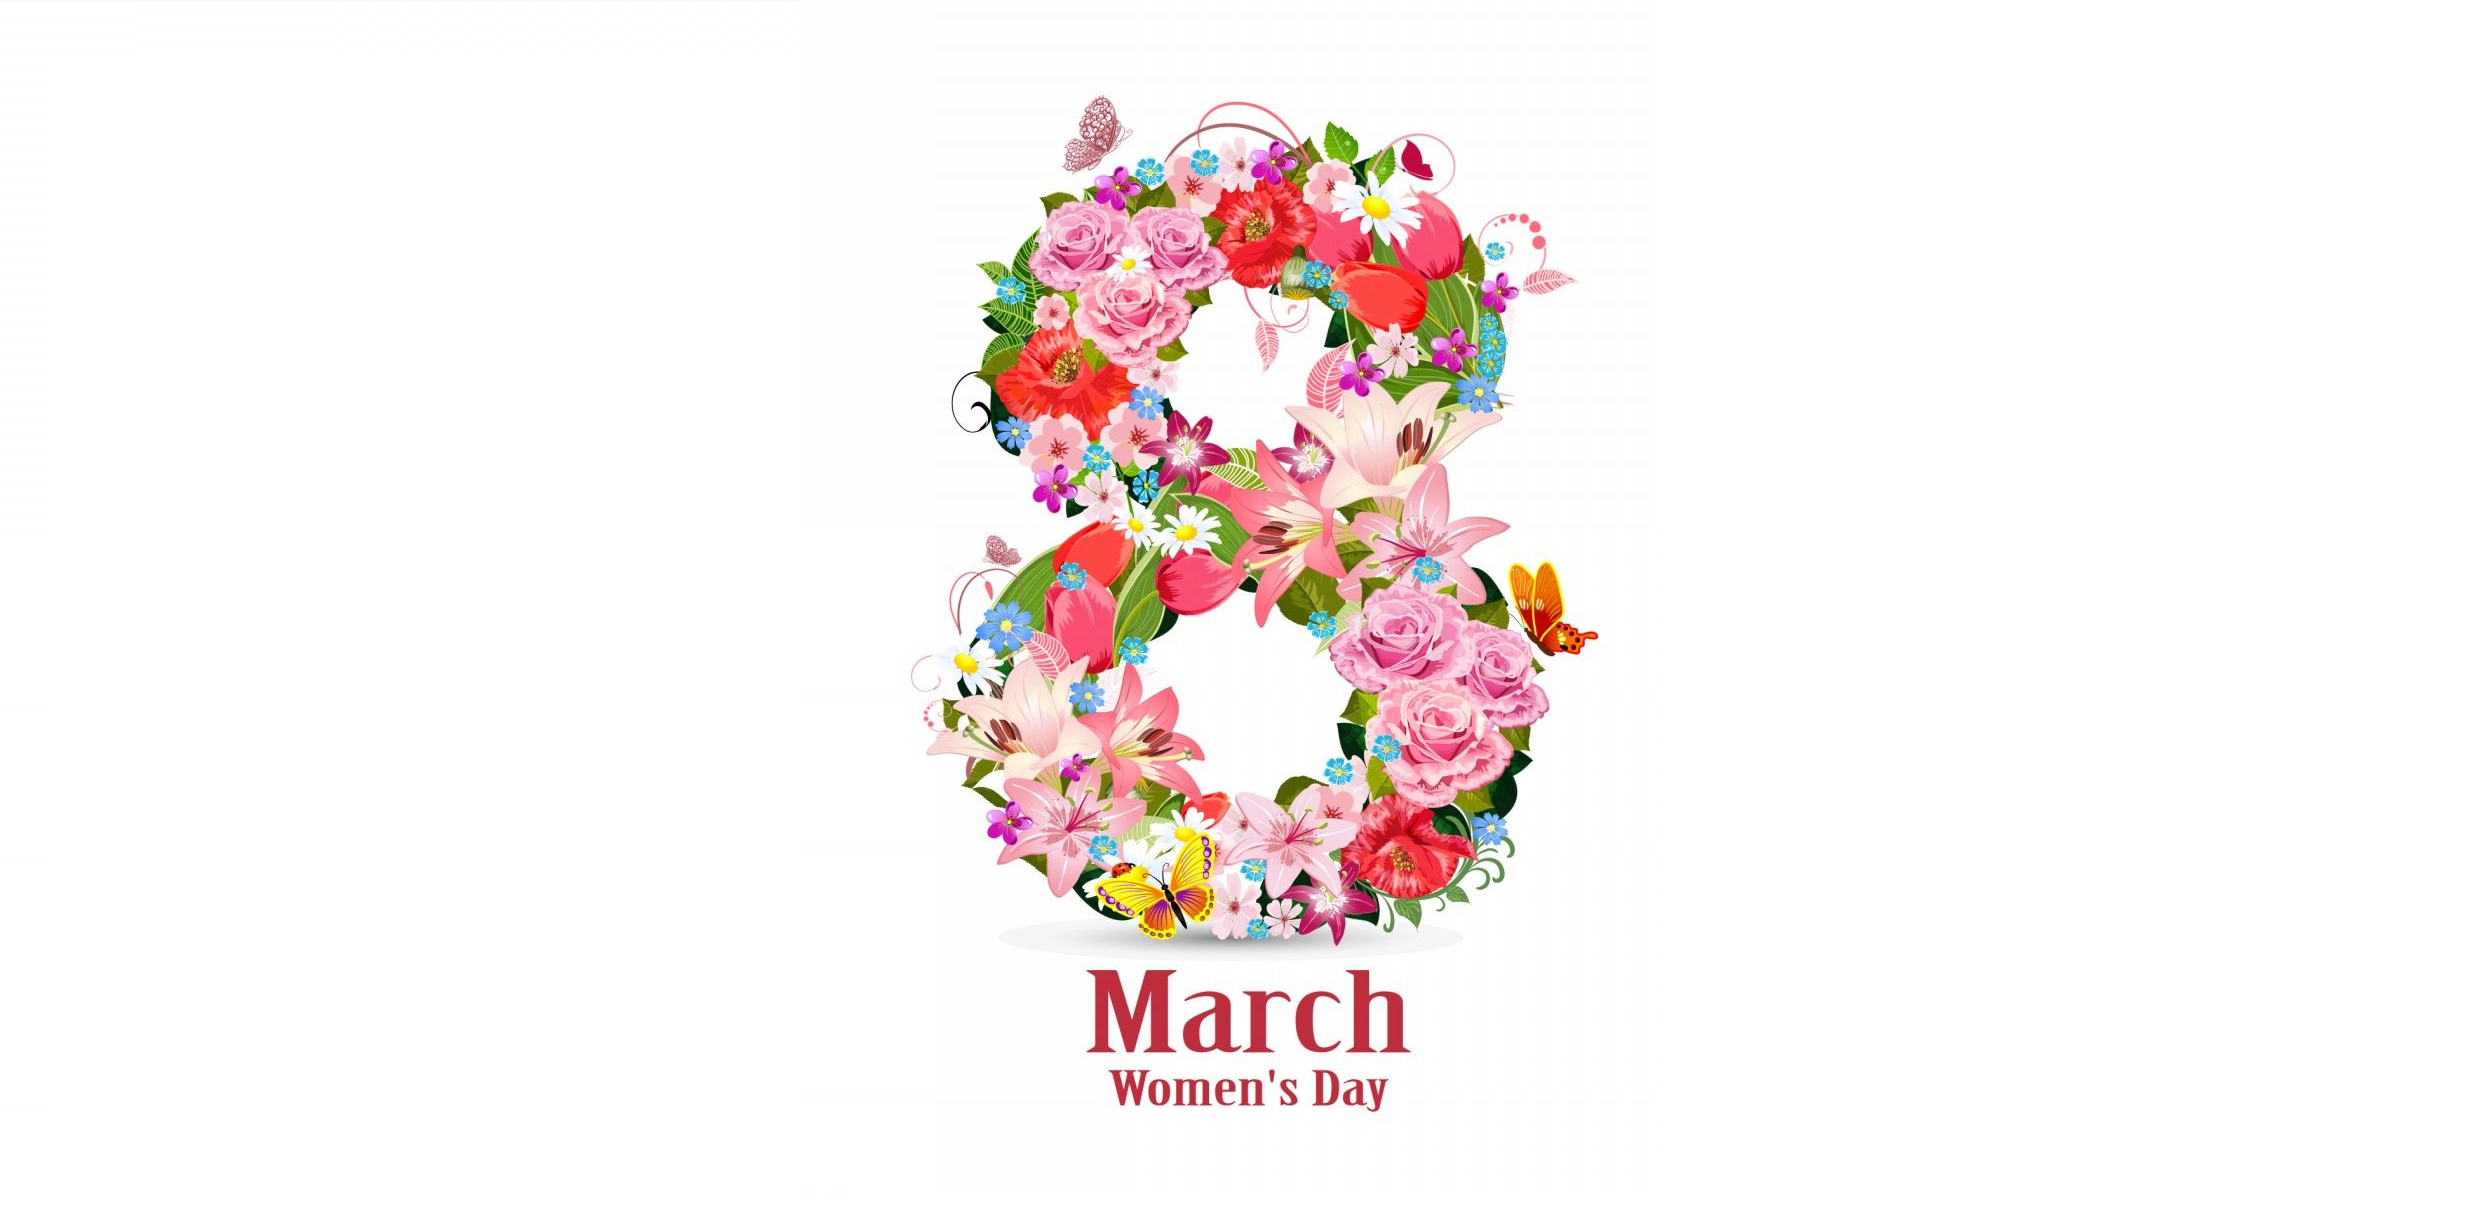 THU administration congratulates International Women's Day on March 8, it is declared a public holiday!